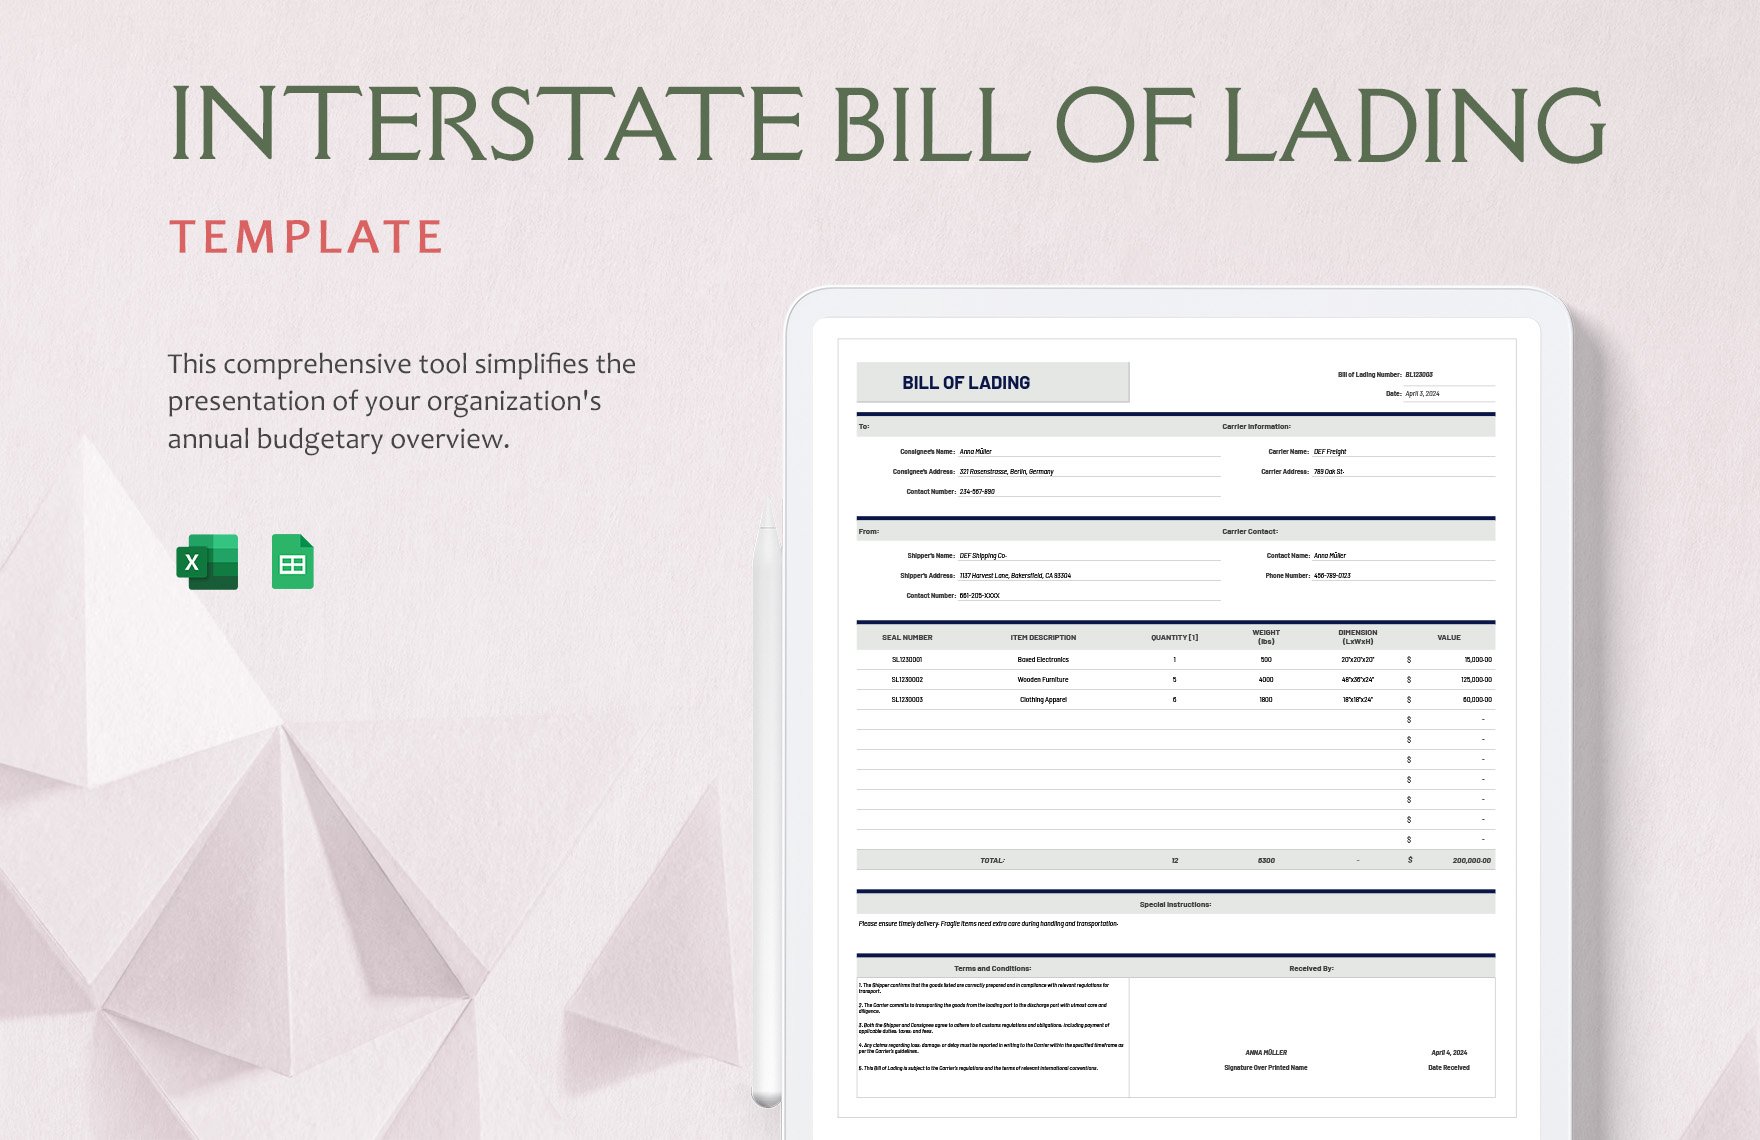 Interstate Bill of Lading Template in Excel, Google Sheets